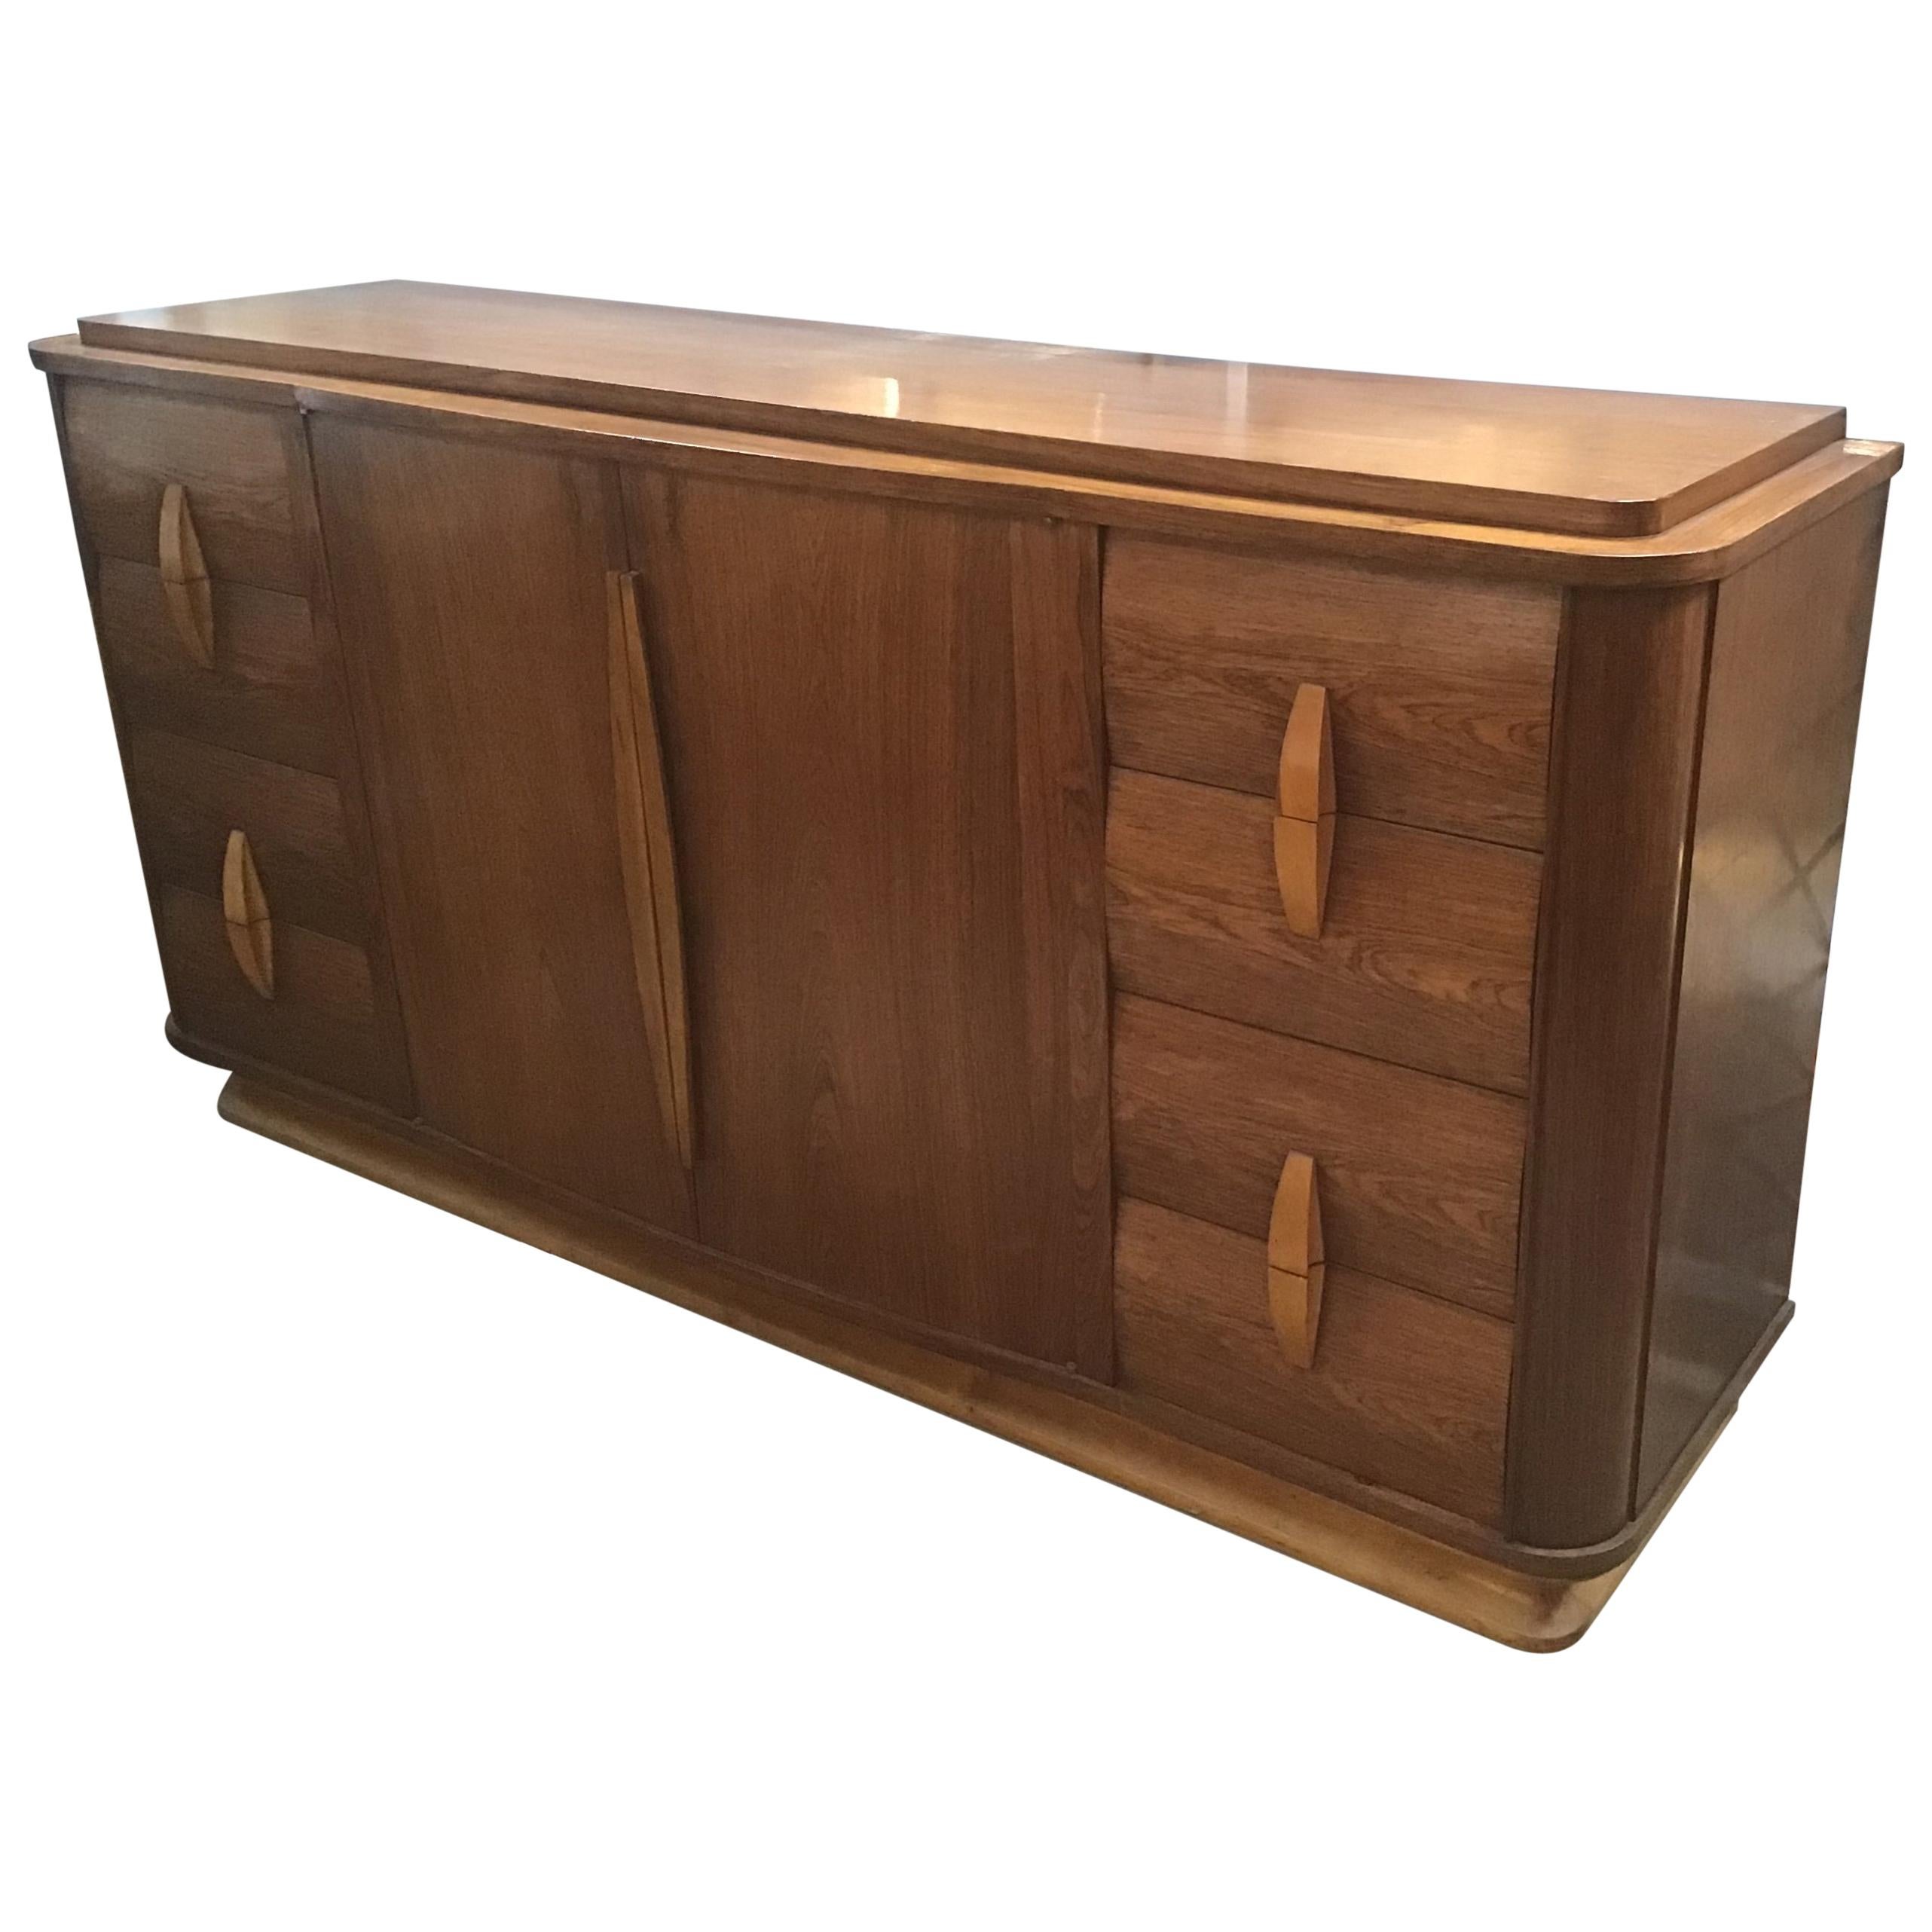 20th Century Italian Art Deco Teak Wood Cupboard with Drawers and Shutters im Angebot